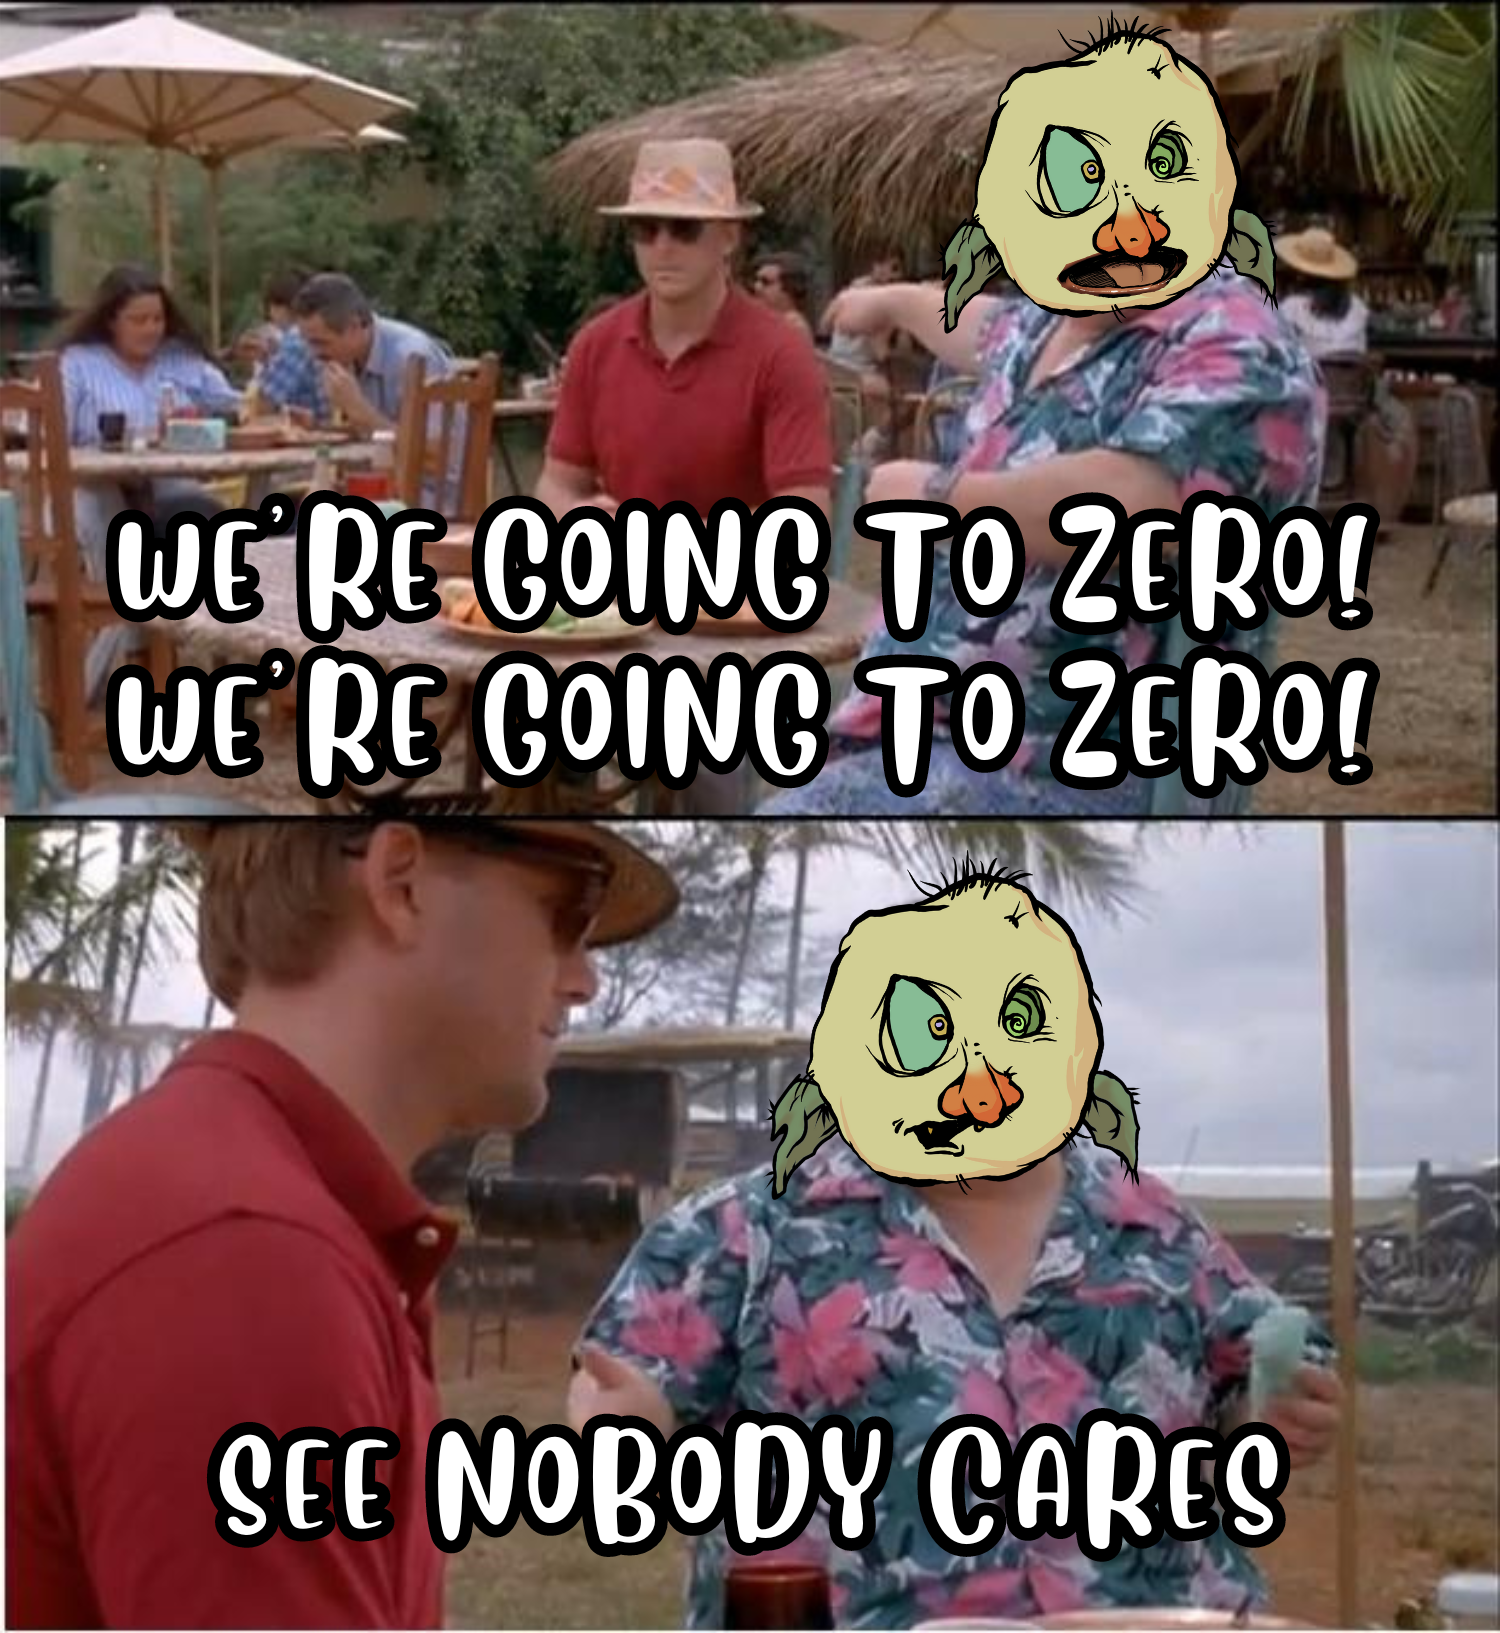 we’re going to zero! we’re going to zero!.png